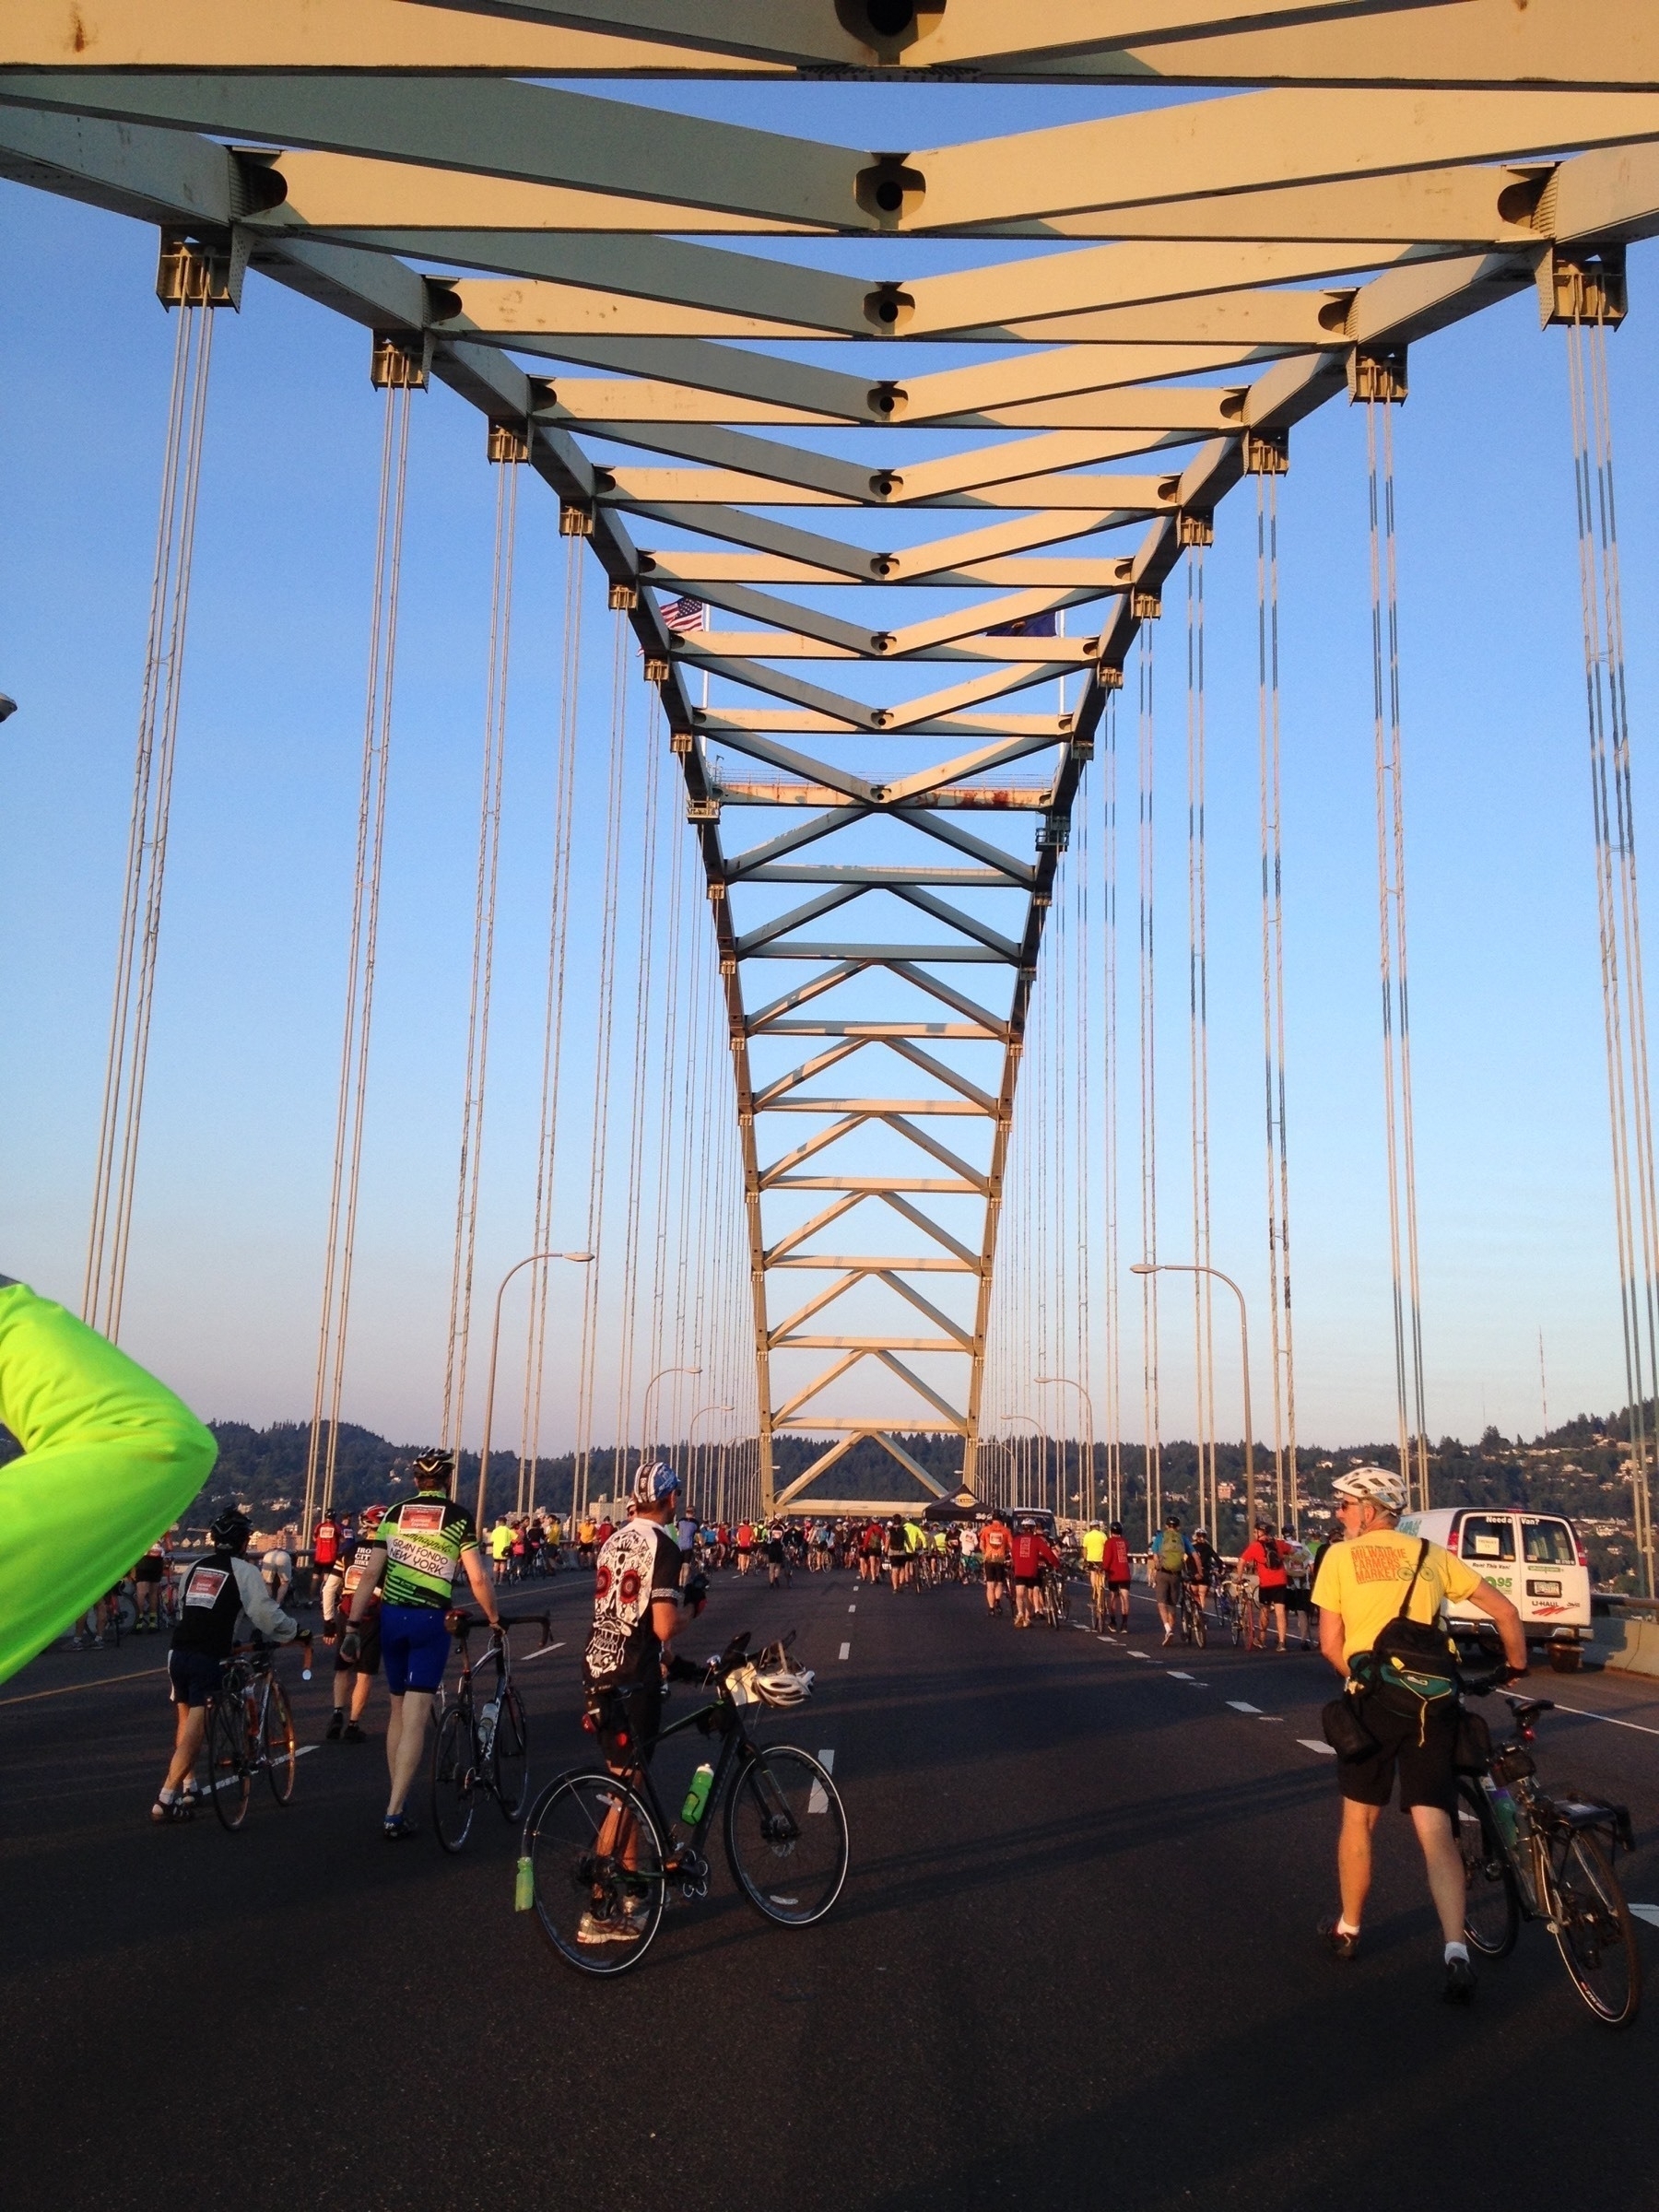 Cyclists stopping on the Fremont Bridge in Portland during the 2014 Providence Bridge Pedal, possibly at the start of the ride as it looks from the light as though the sun is just rising